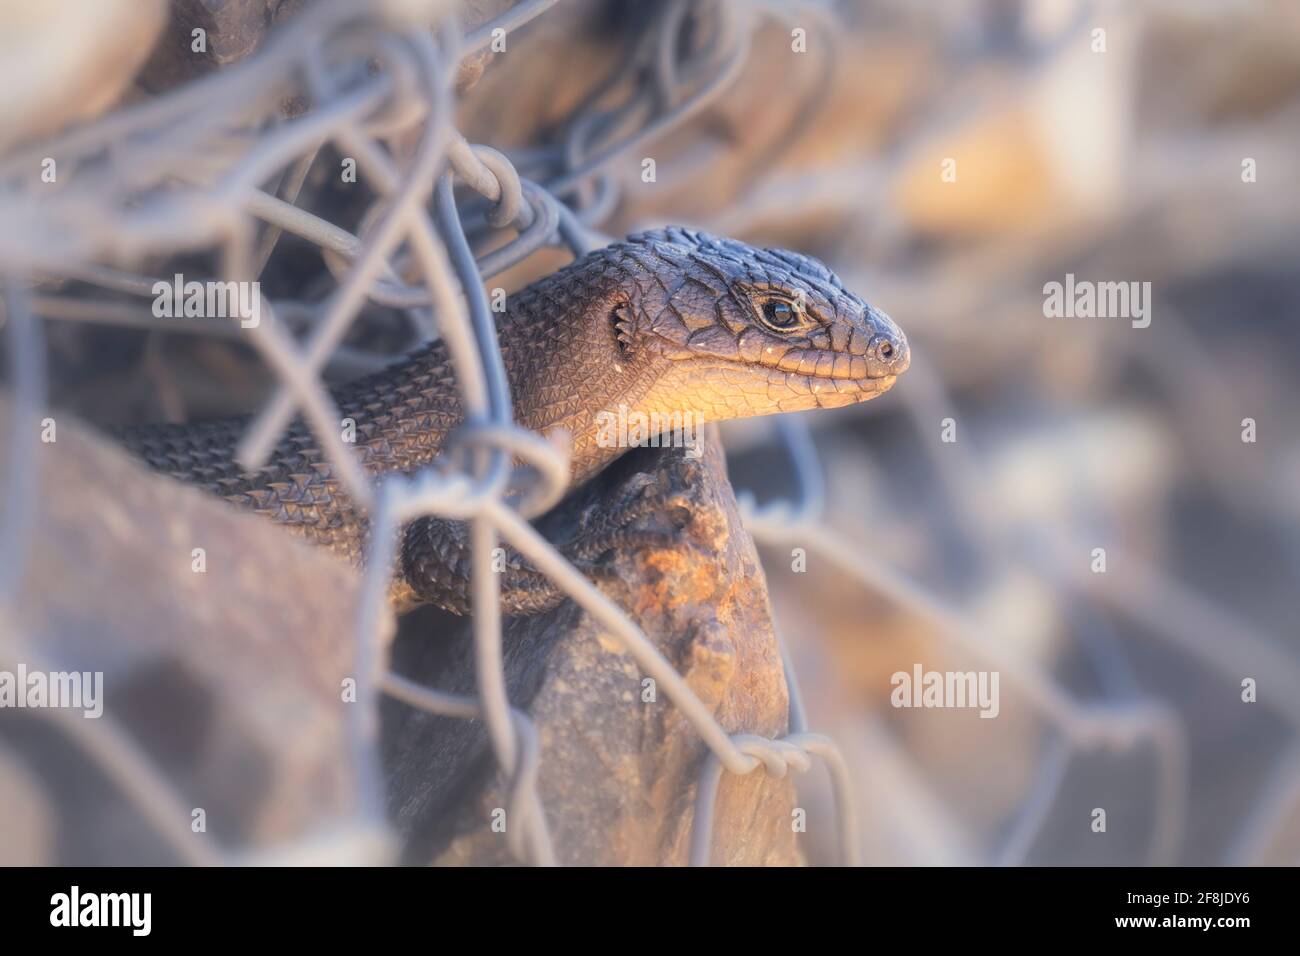 Portrait of a Cunningham's spiny-tailed skink peering through a fence, Australia Stock Photo